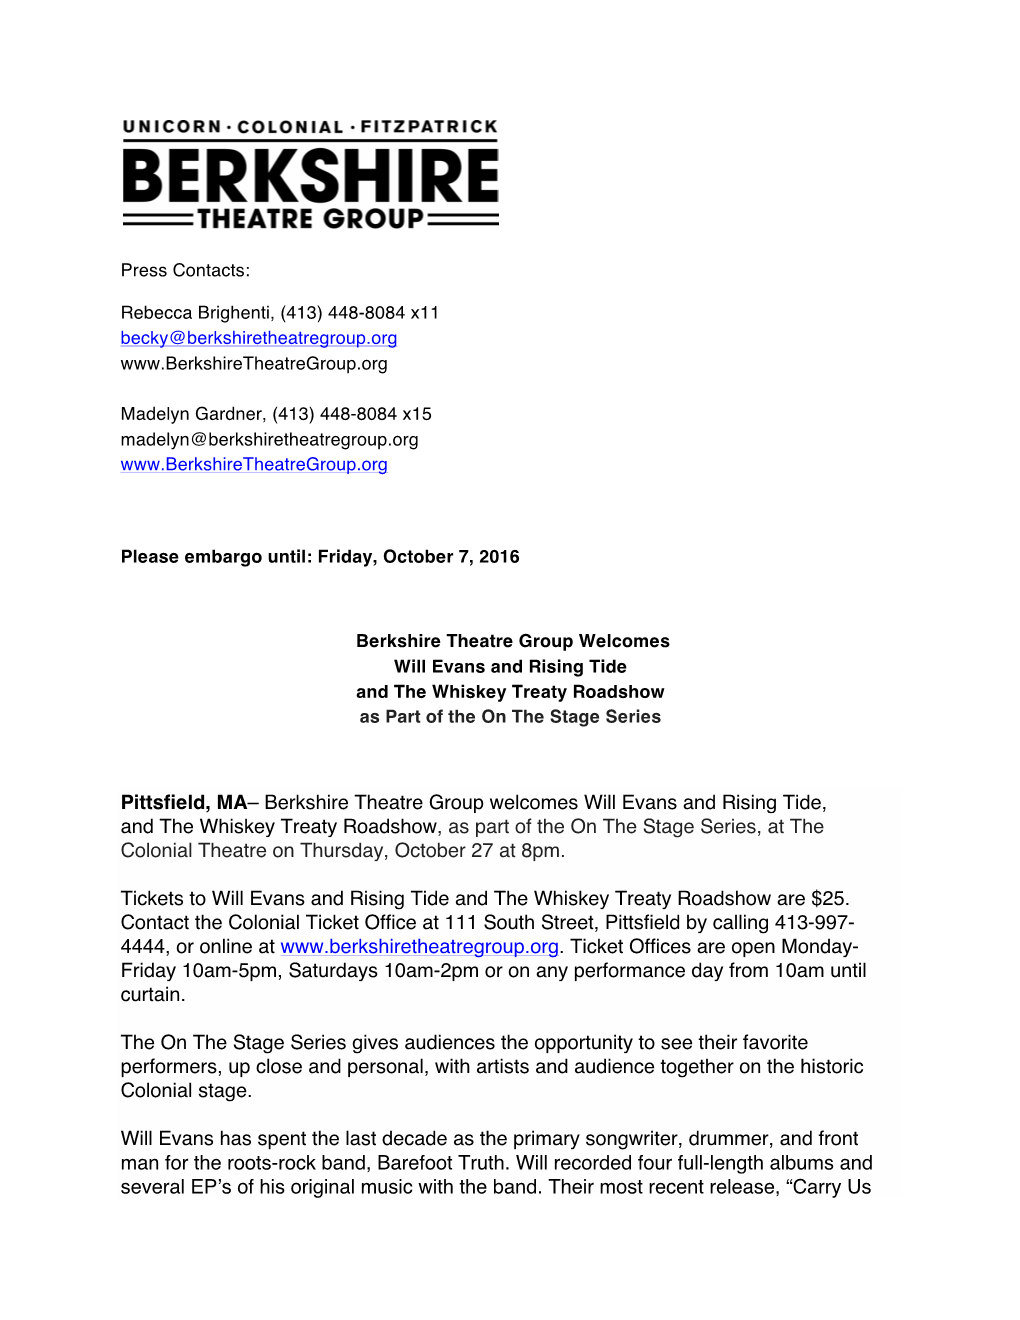 Berkshire Theatre Group Welcomes Will Evans and Rising Tide, And